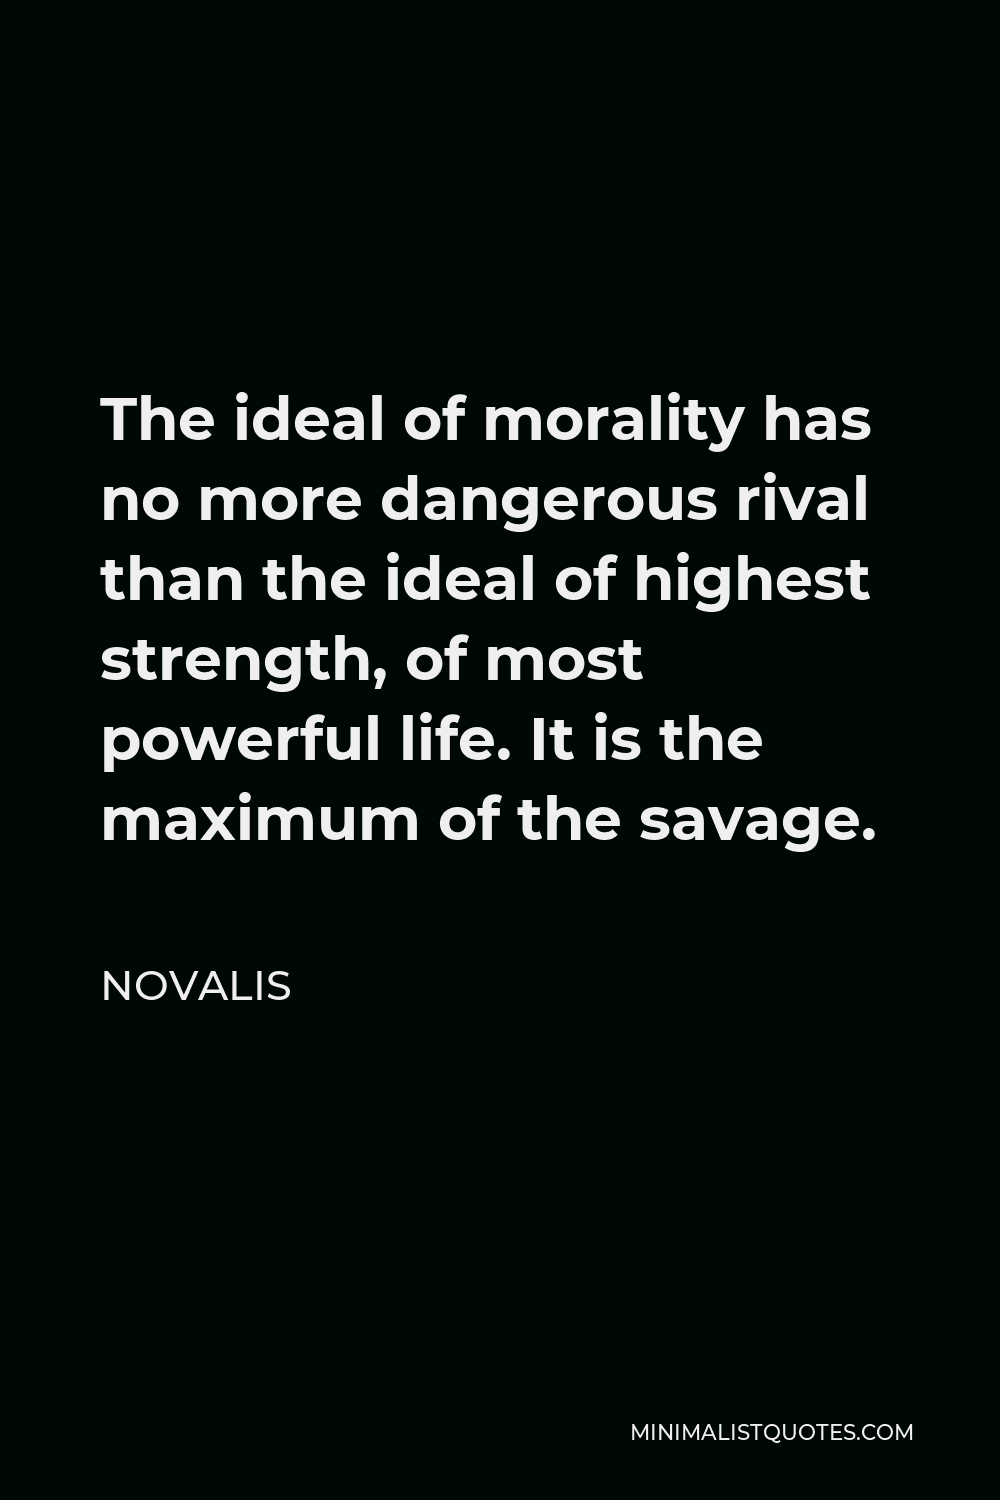 Novalis Quote - The ideal of morality has no more dangerous rival than the ideal of highest strength, of most powerful life. It is the maximum of the savage.